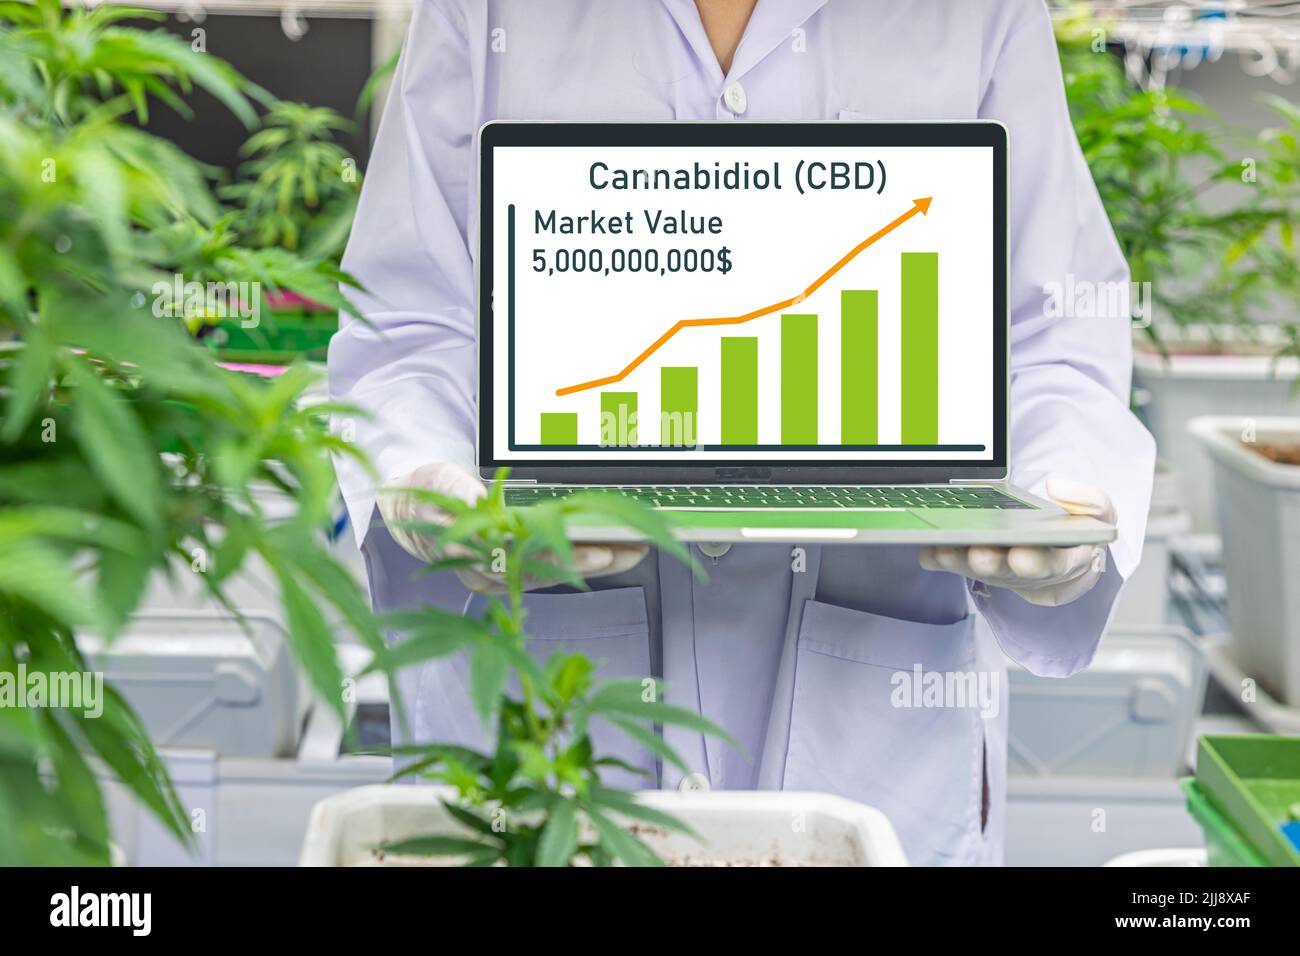 Cannabidiol or CBD products Market size value annual growth rate up rise high concept. Stock Photo